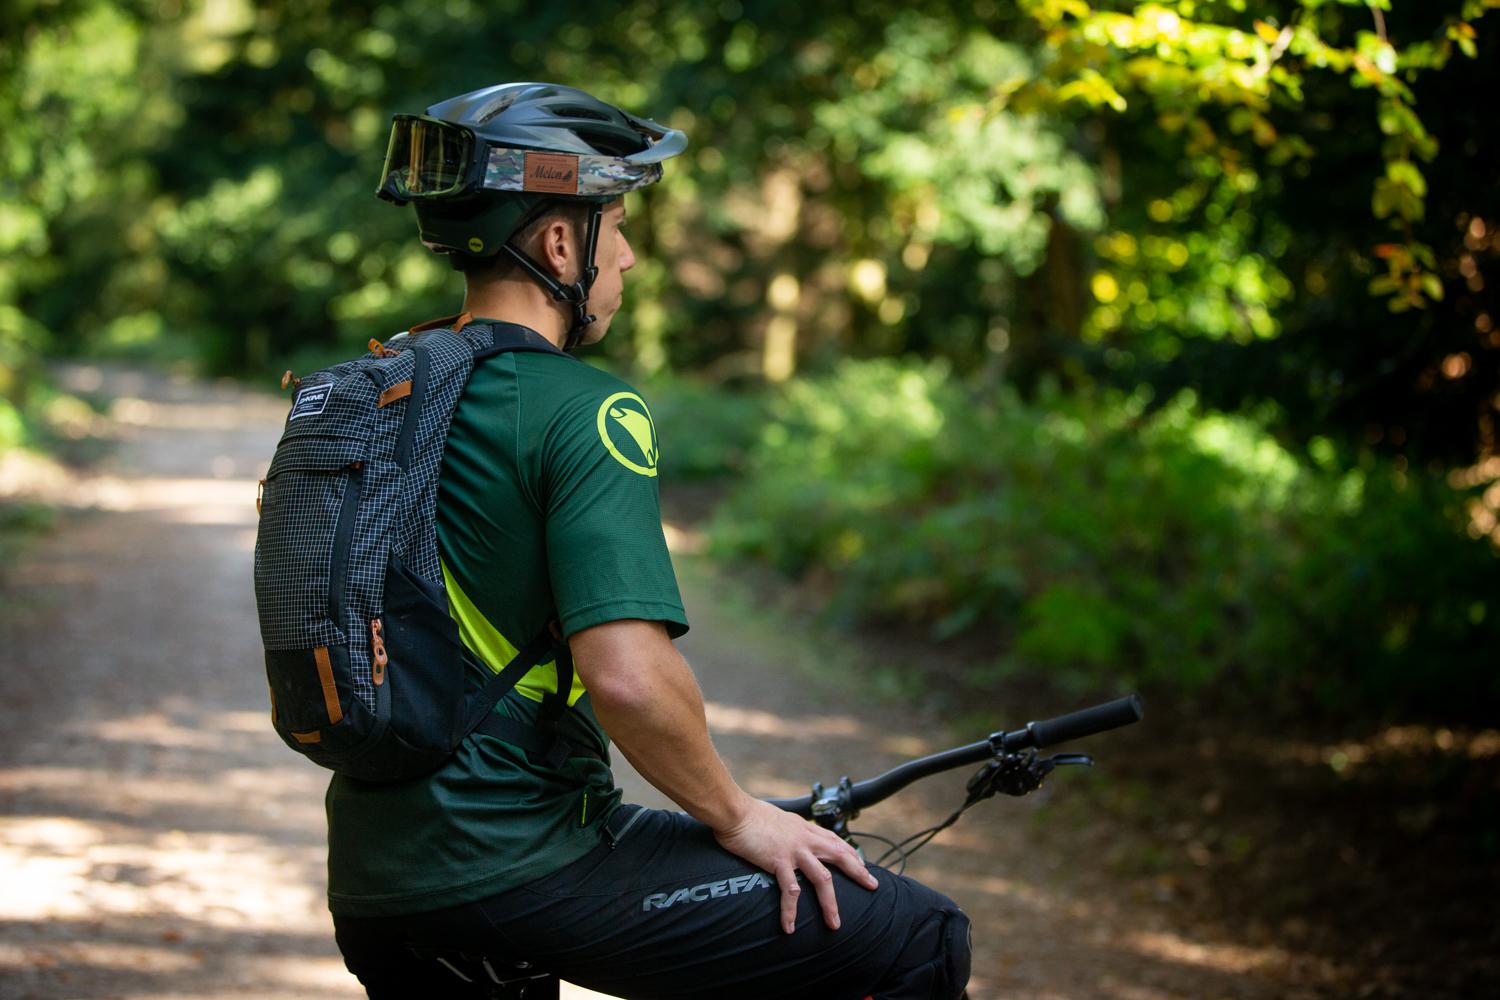 gone crazy rigidity desire Tested : Ben's DaKine Syncline 12L Hydration Pack Review.